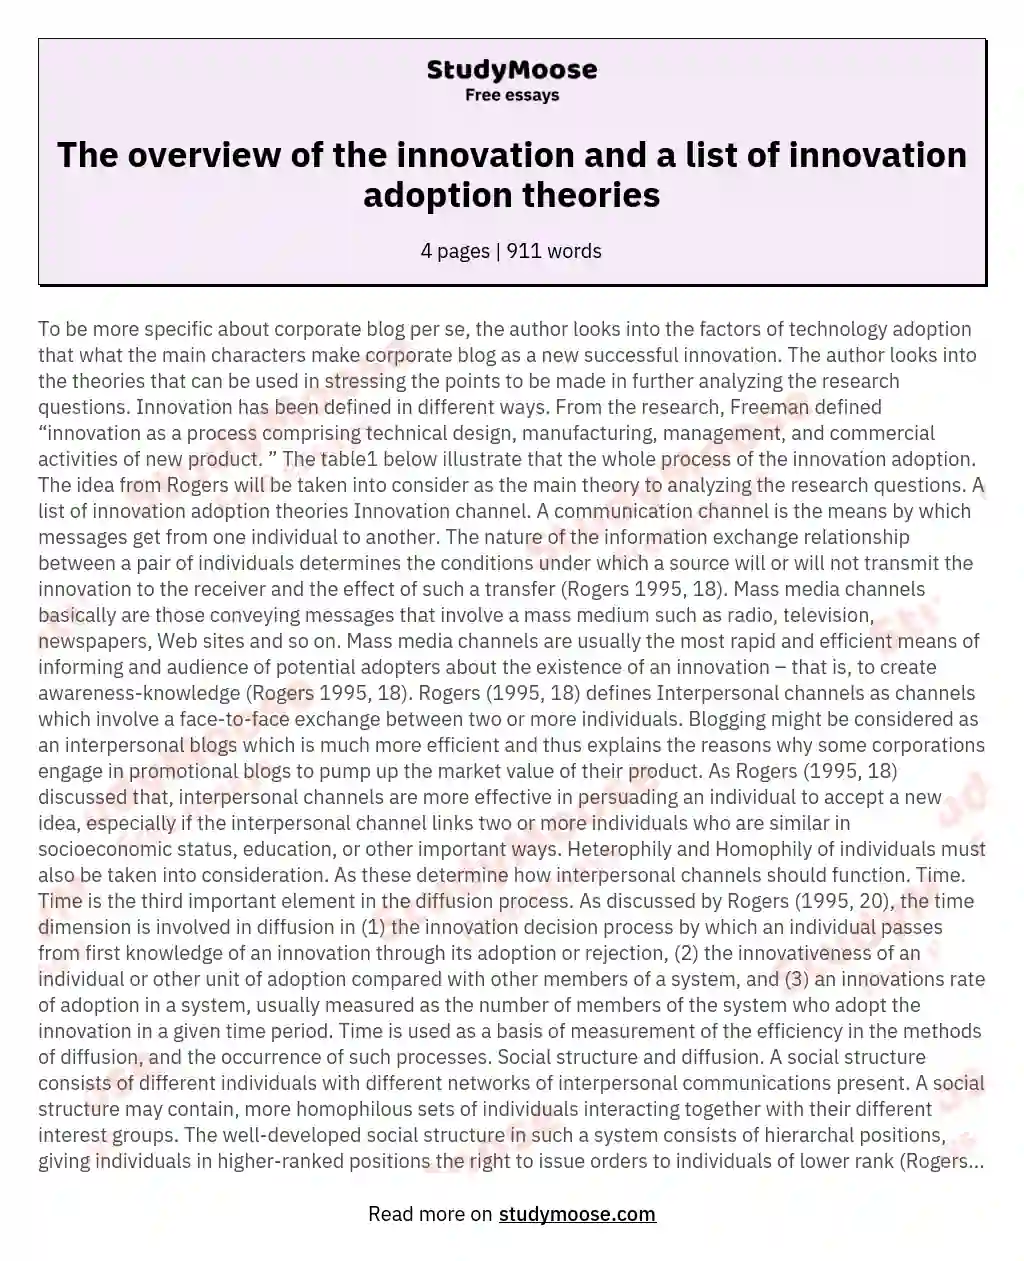 The overview of the innovation and a list of innovation adoption theories